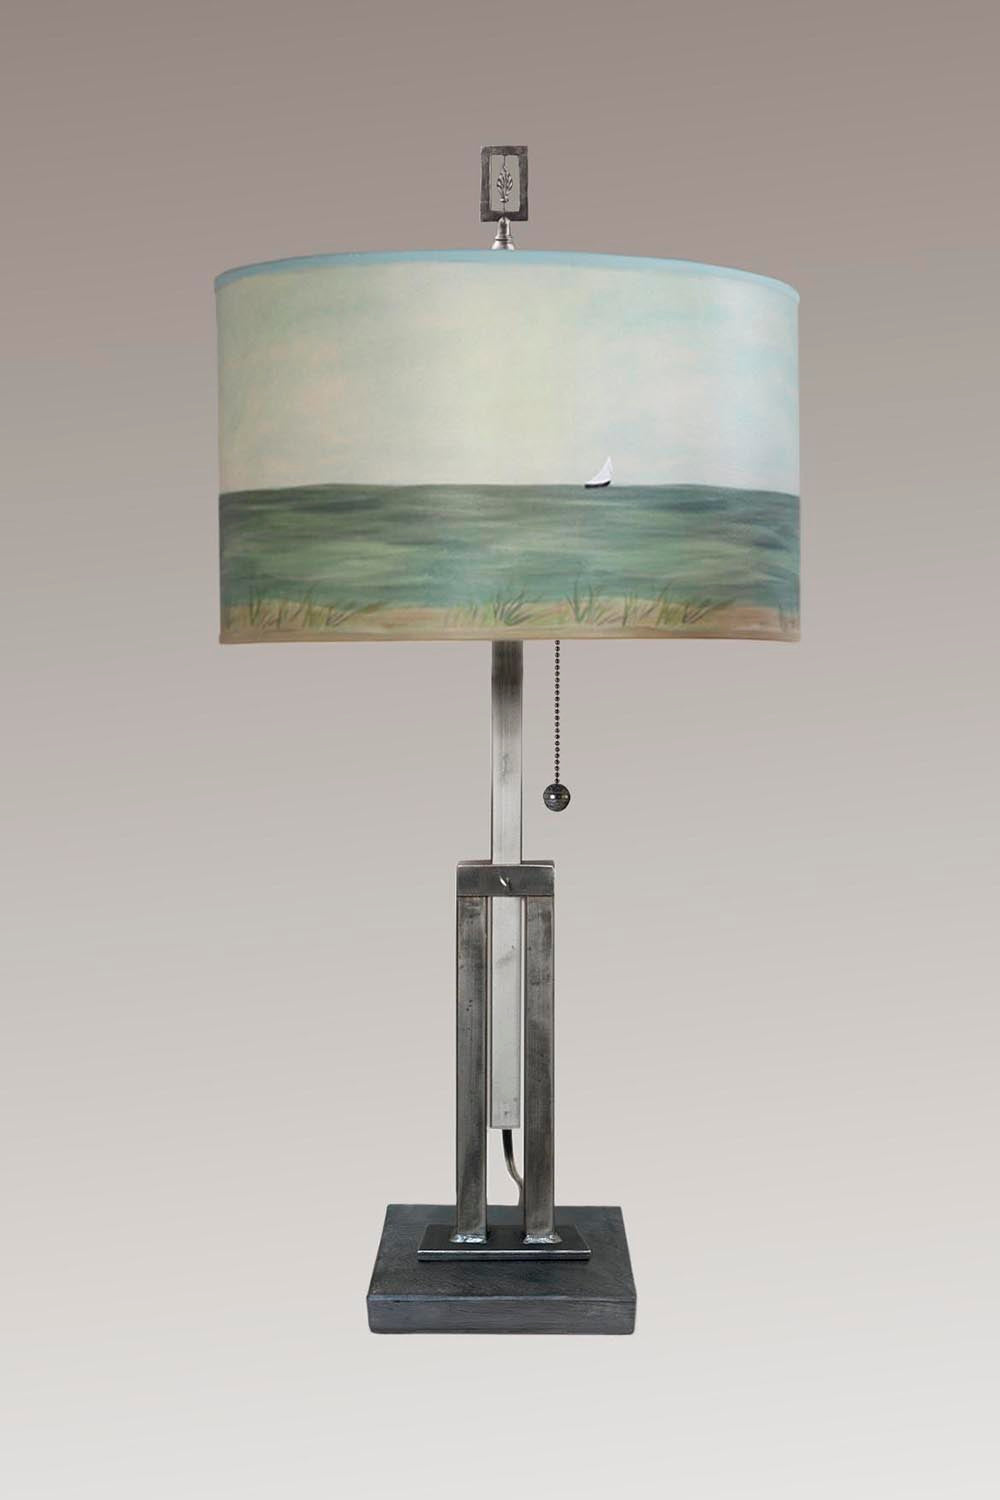 Adjustable-Height Steel Table Lamp with Large Drum Shade in Shore